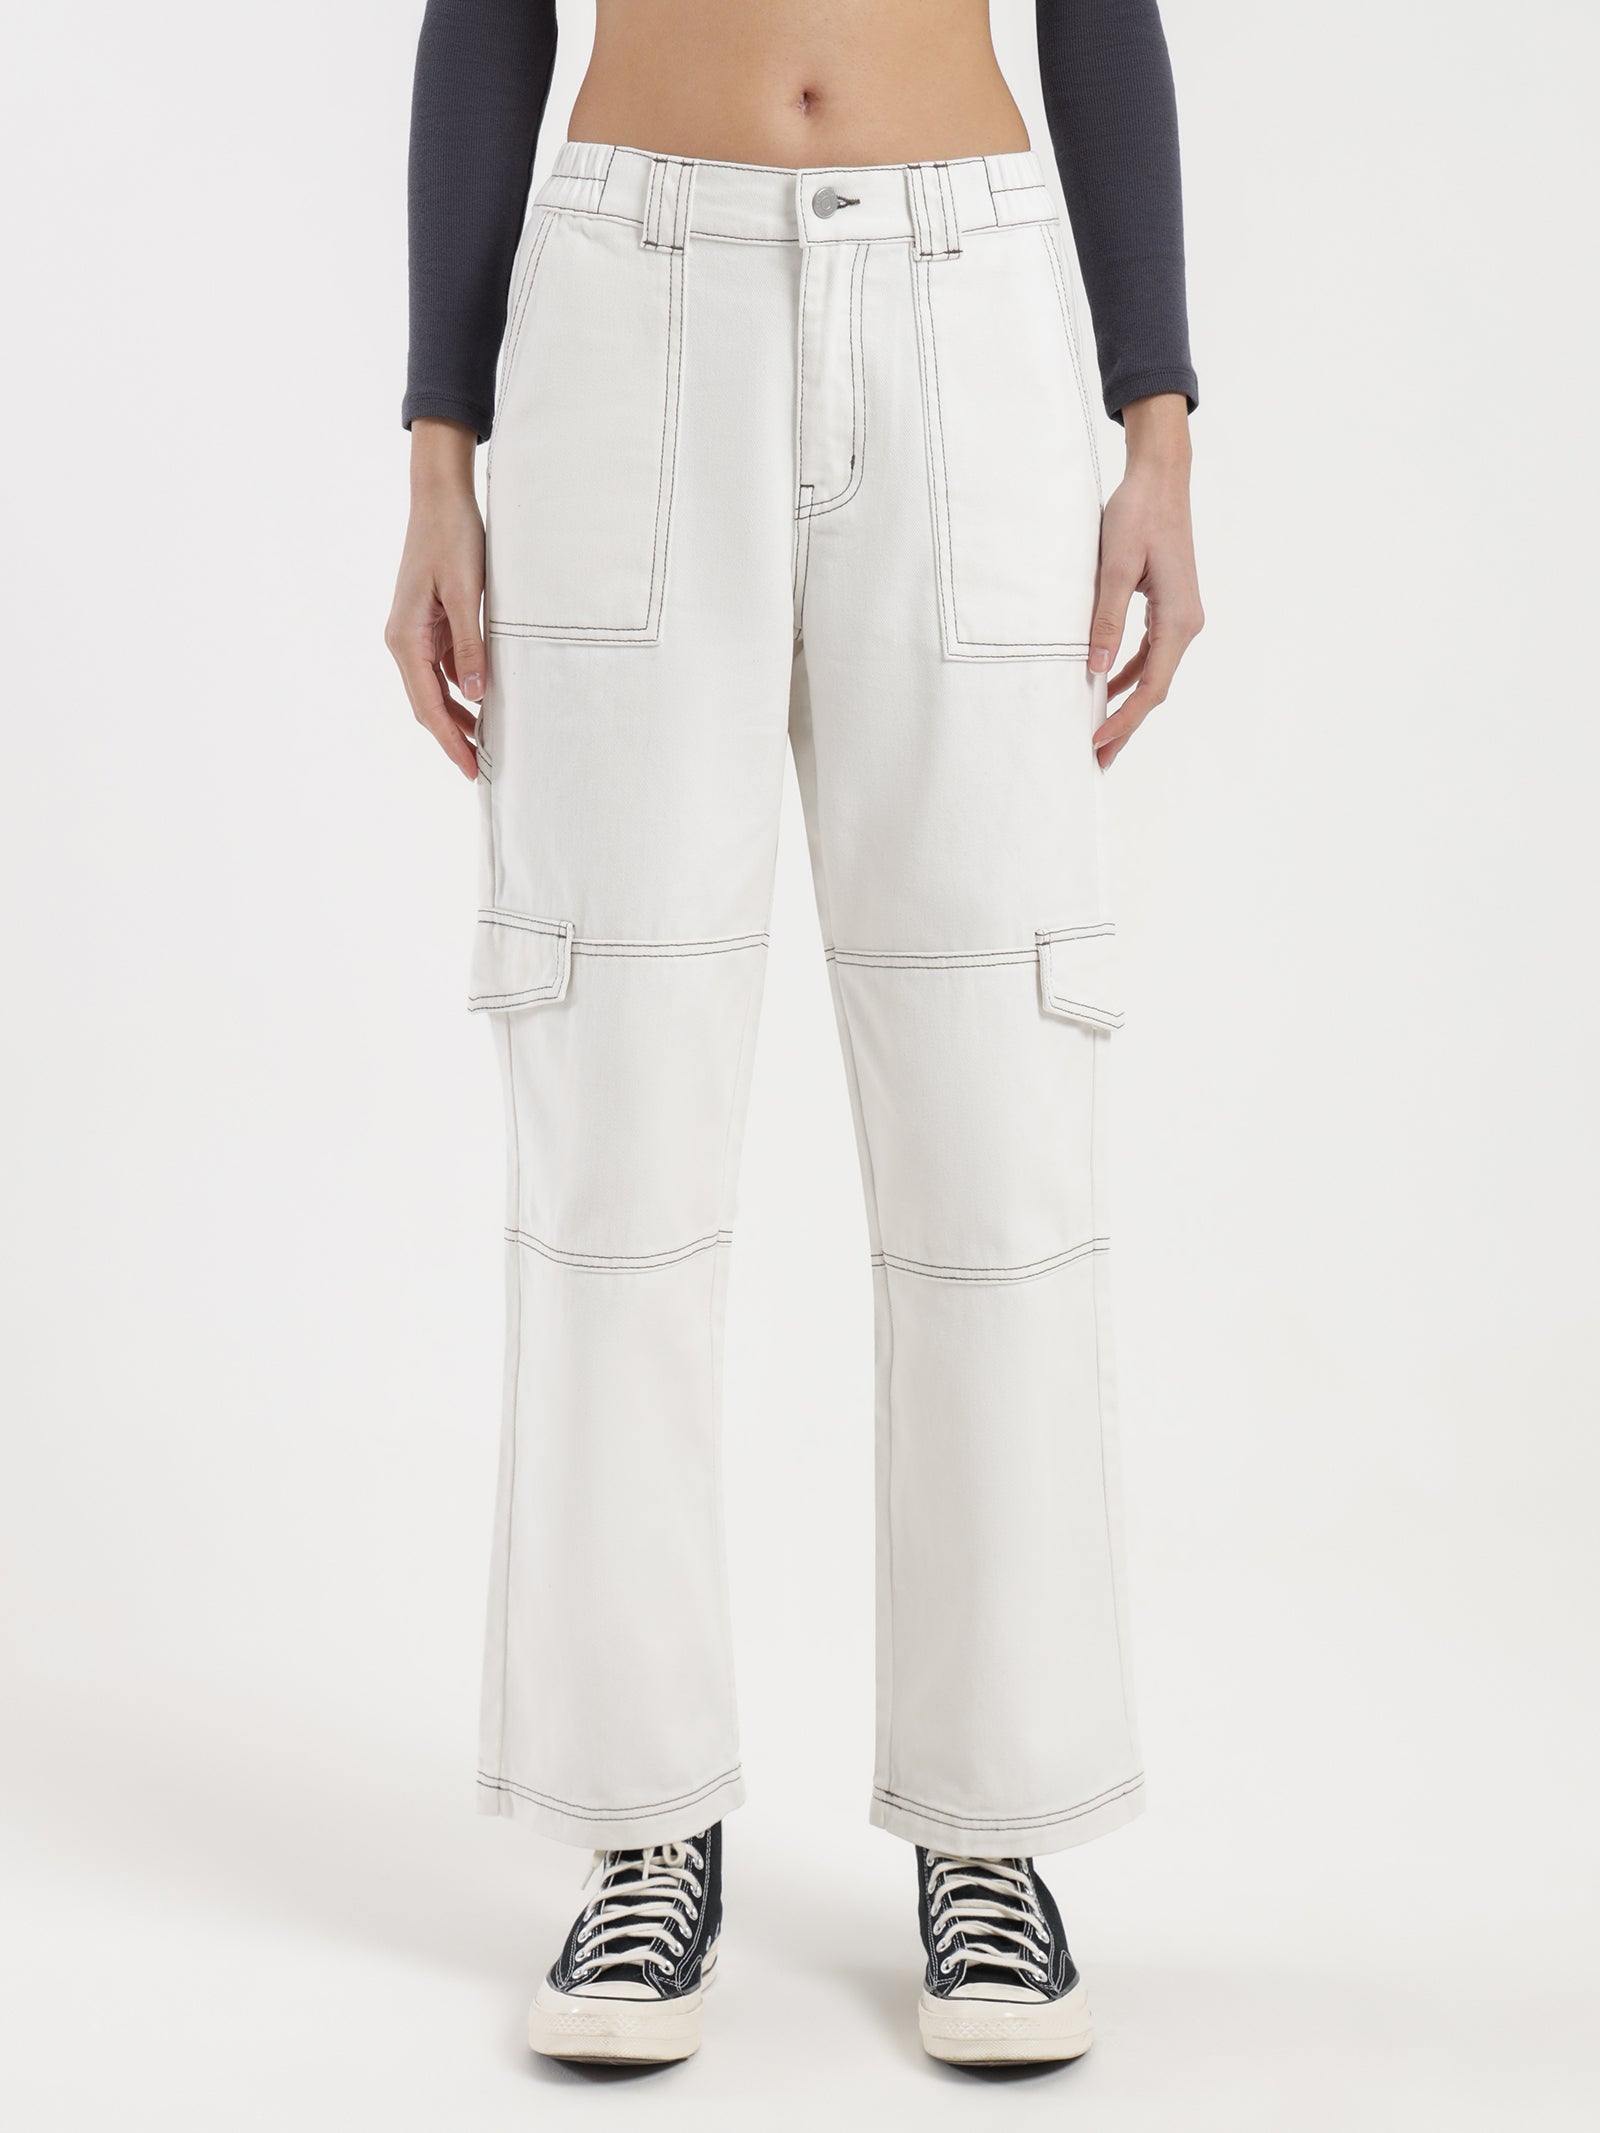 Off White Solid Jeans - Selling Fast at Pantaloons.com